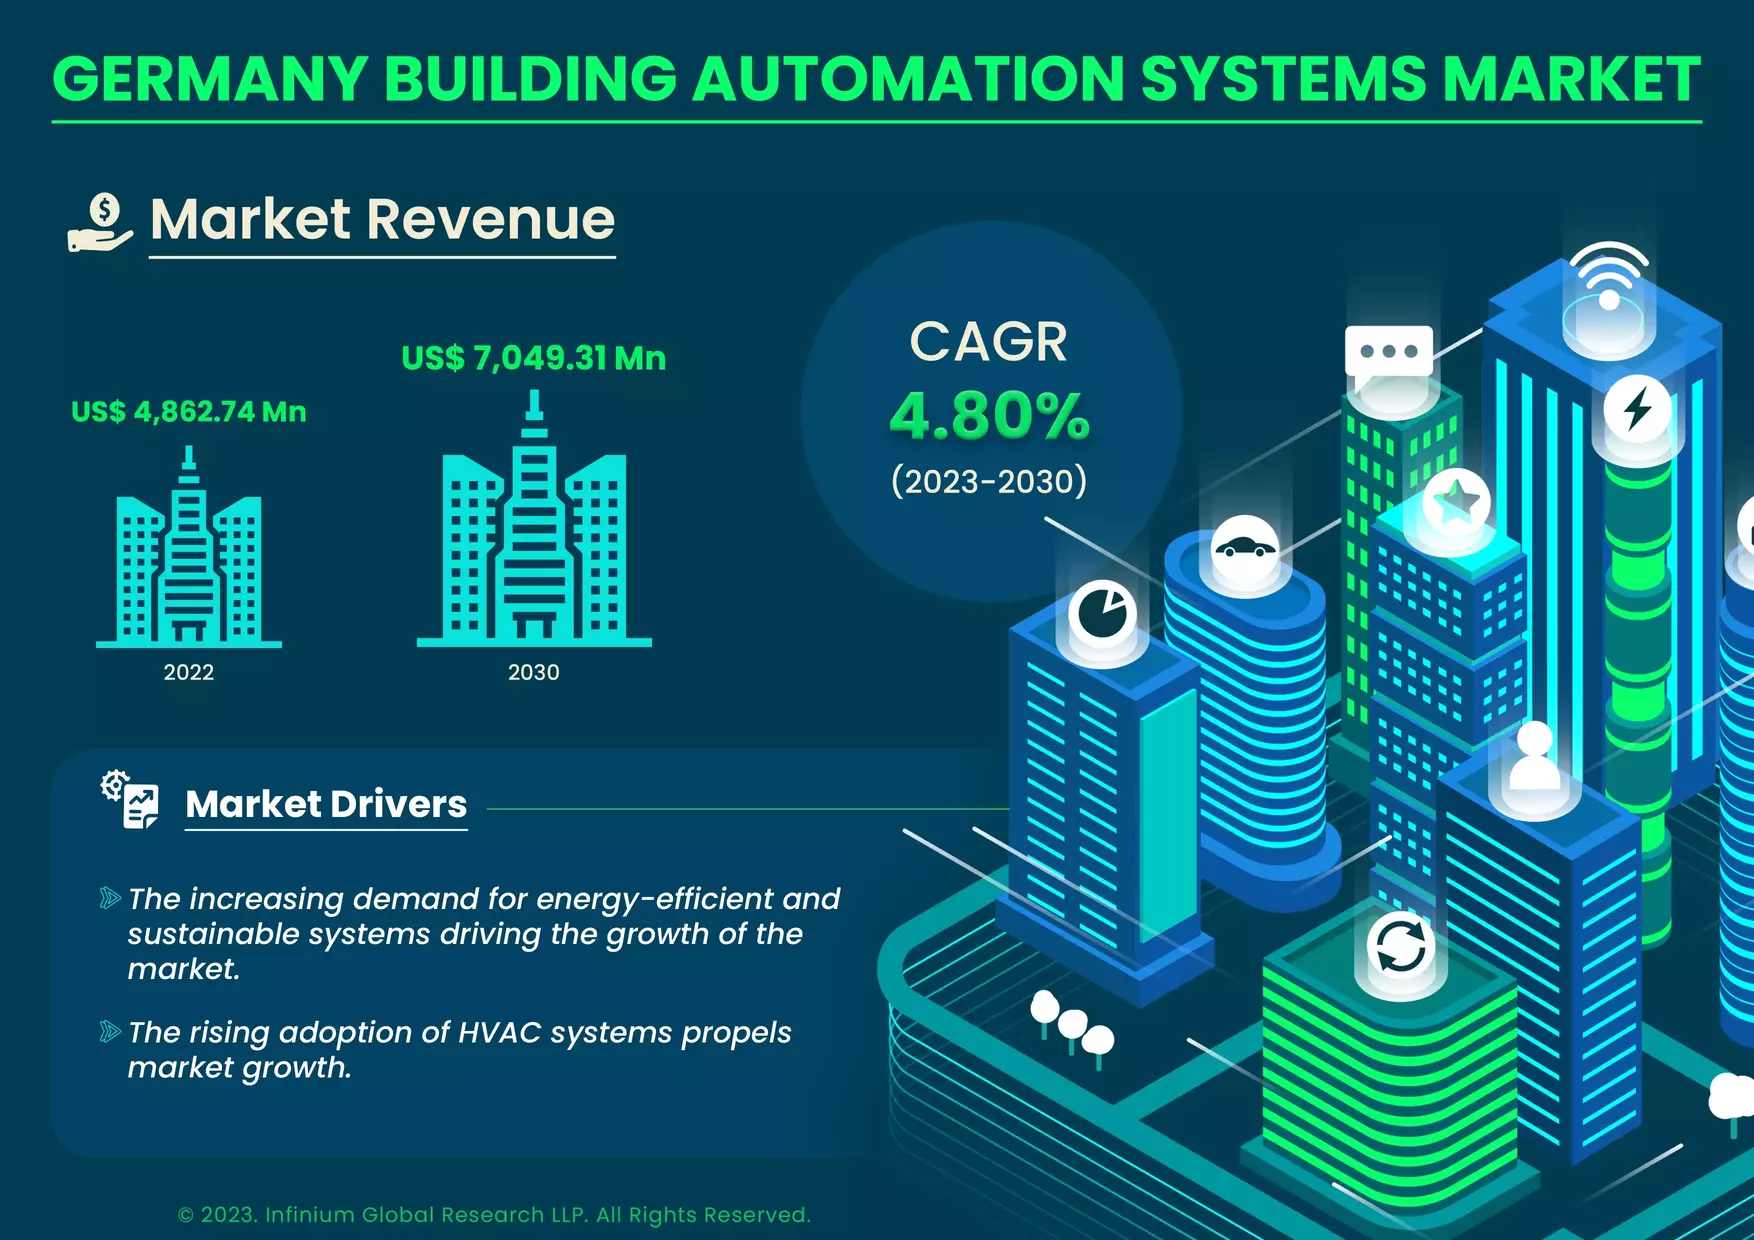 Infograph - Germany Building Automation Systems Market was Valued at USD 4,862.74 Million in 2022 and